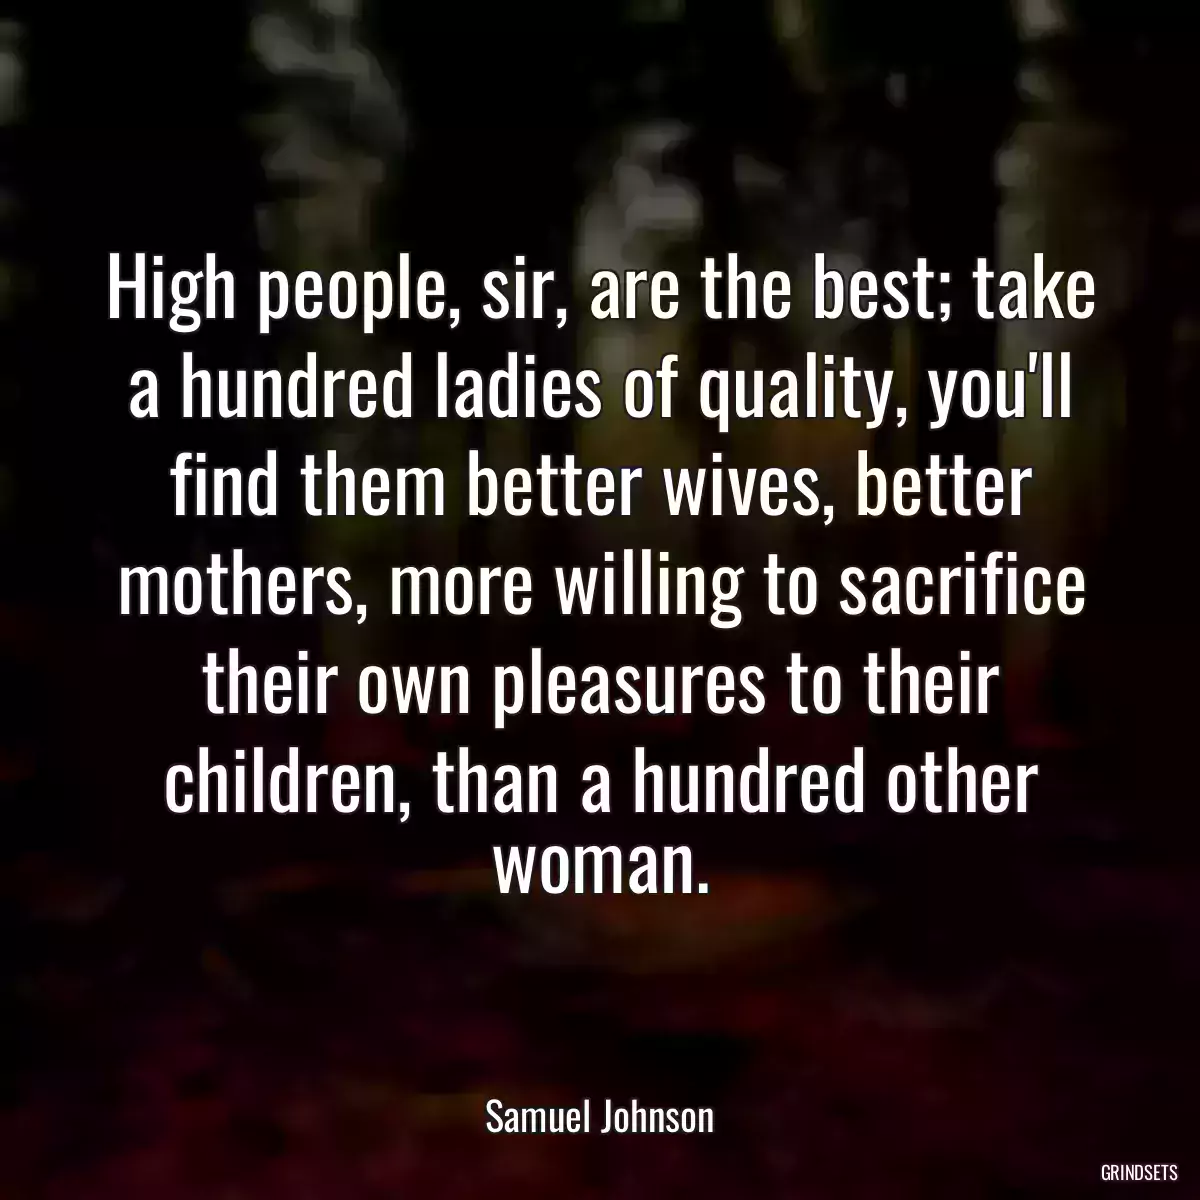 High people, sir, are the best; take a hundred ladies of quality, you\'ll find them better wives, better mothers, more willing to sacrifice their own pleasures to their children, than a hundred other woman.